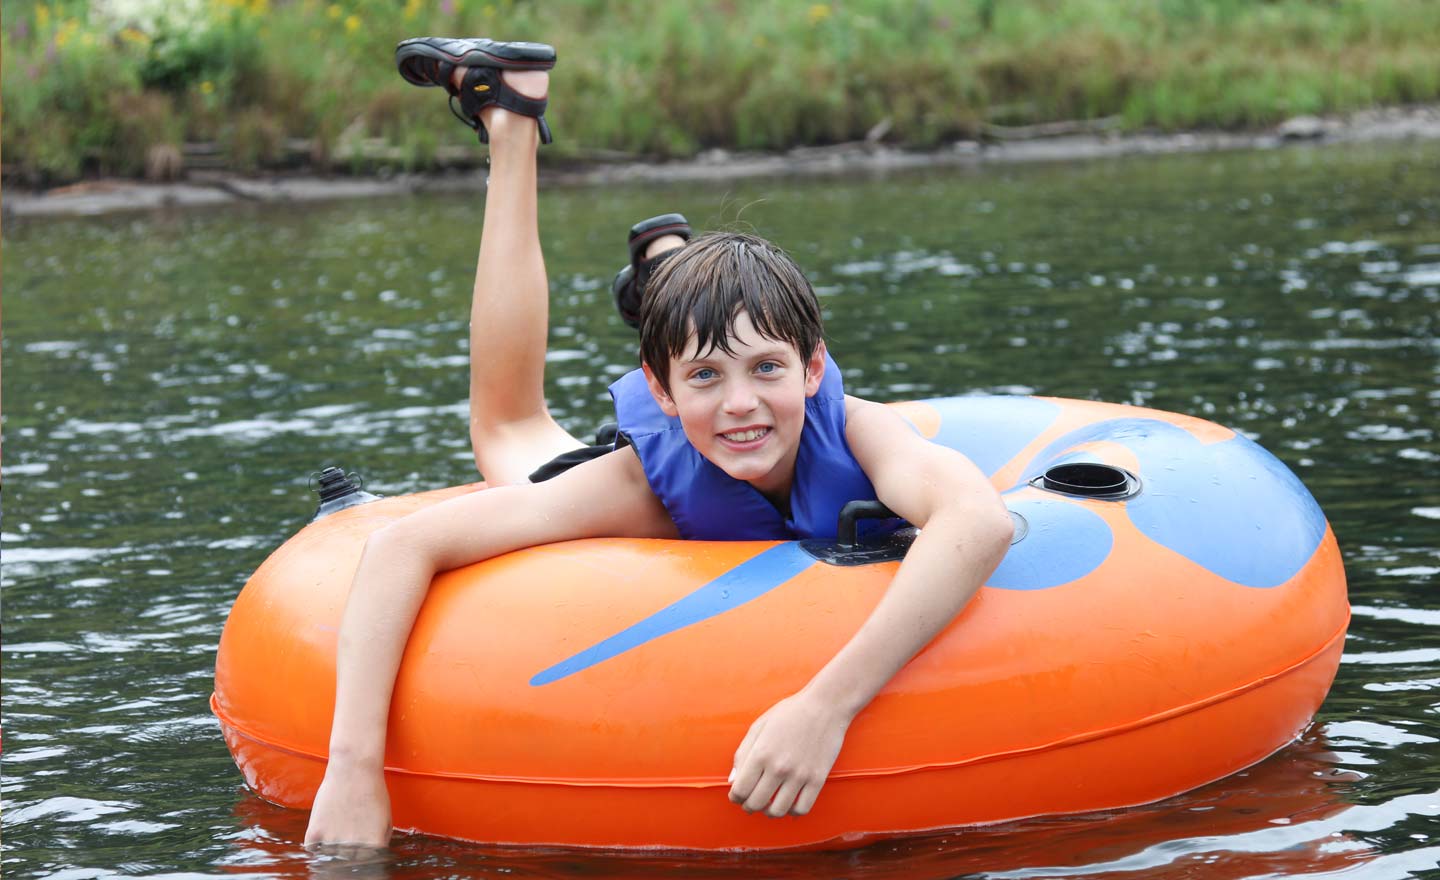 young boy smiling in tube on river Indian Head Canoeing Rafting Kayaking Tubing Delaware River